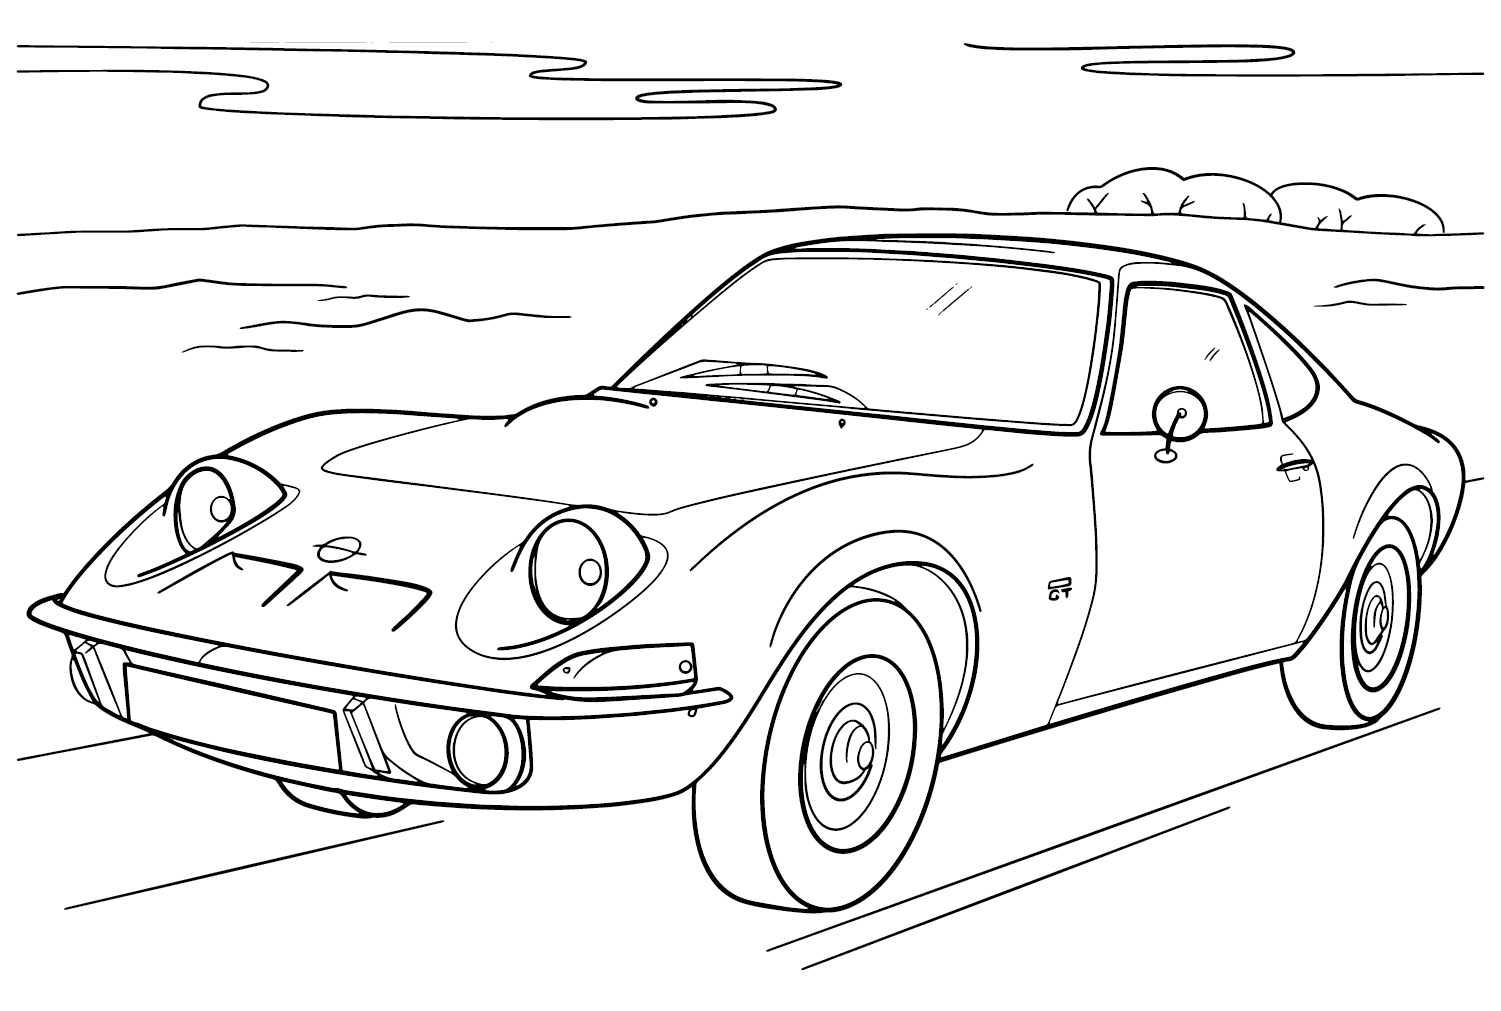 Opel GT 1970 Coloring Page from Opel